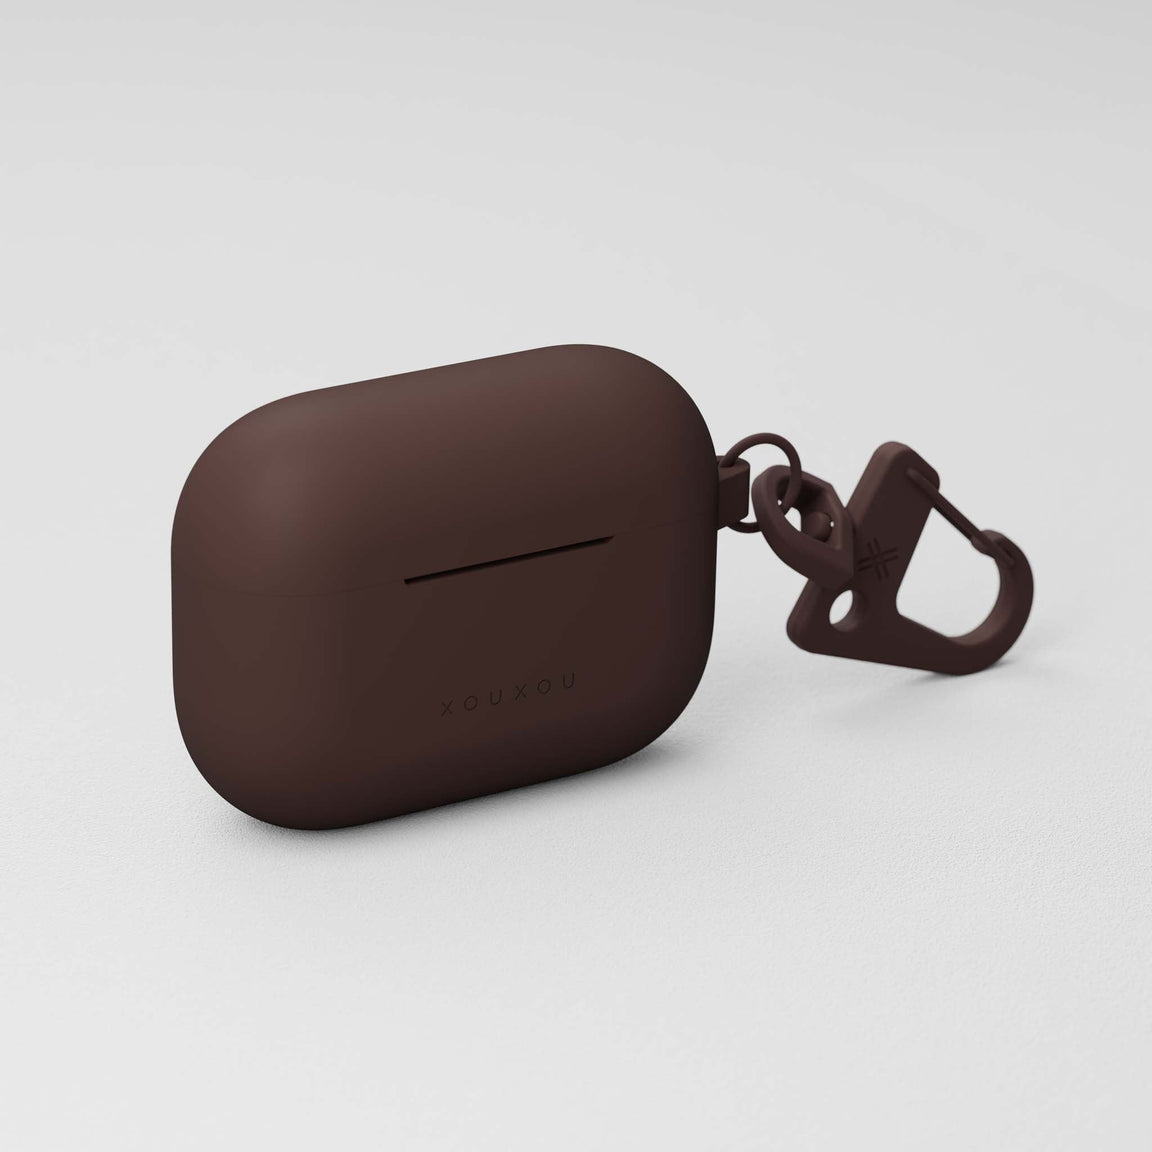 Apple AirPods Pro case in Earth Brown silicone | XOUXOU